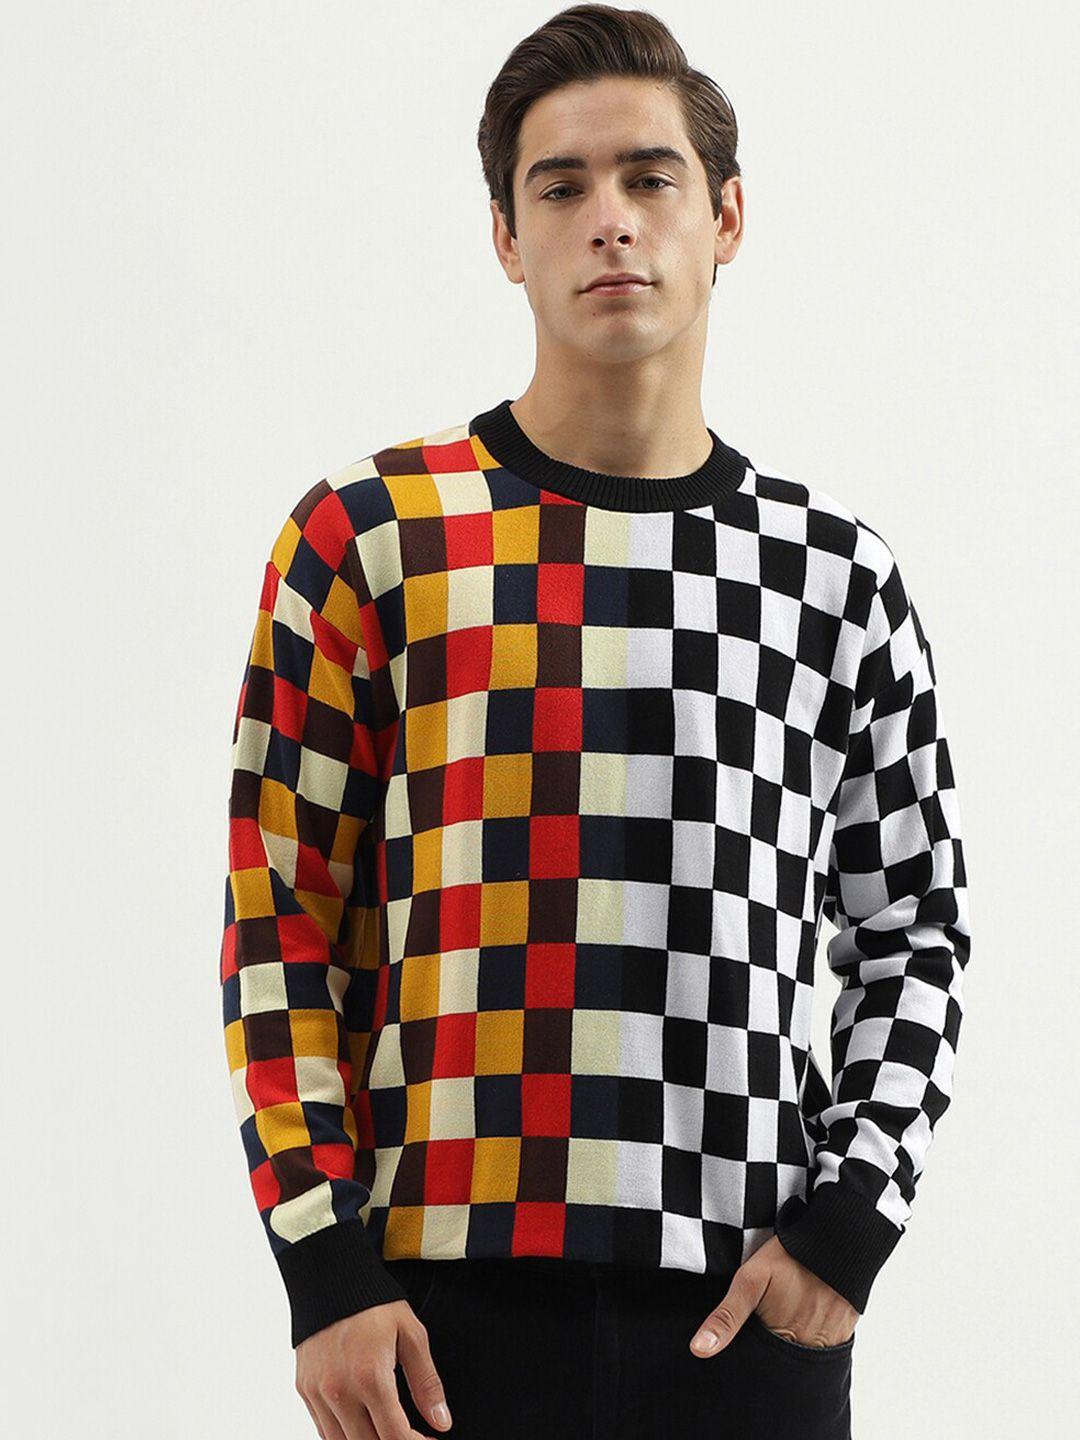 united-colors-of-benetton-geometric-printed-cotton-pullover-sweater